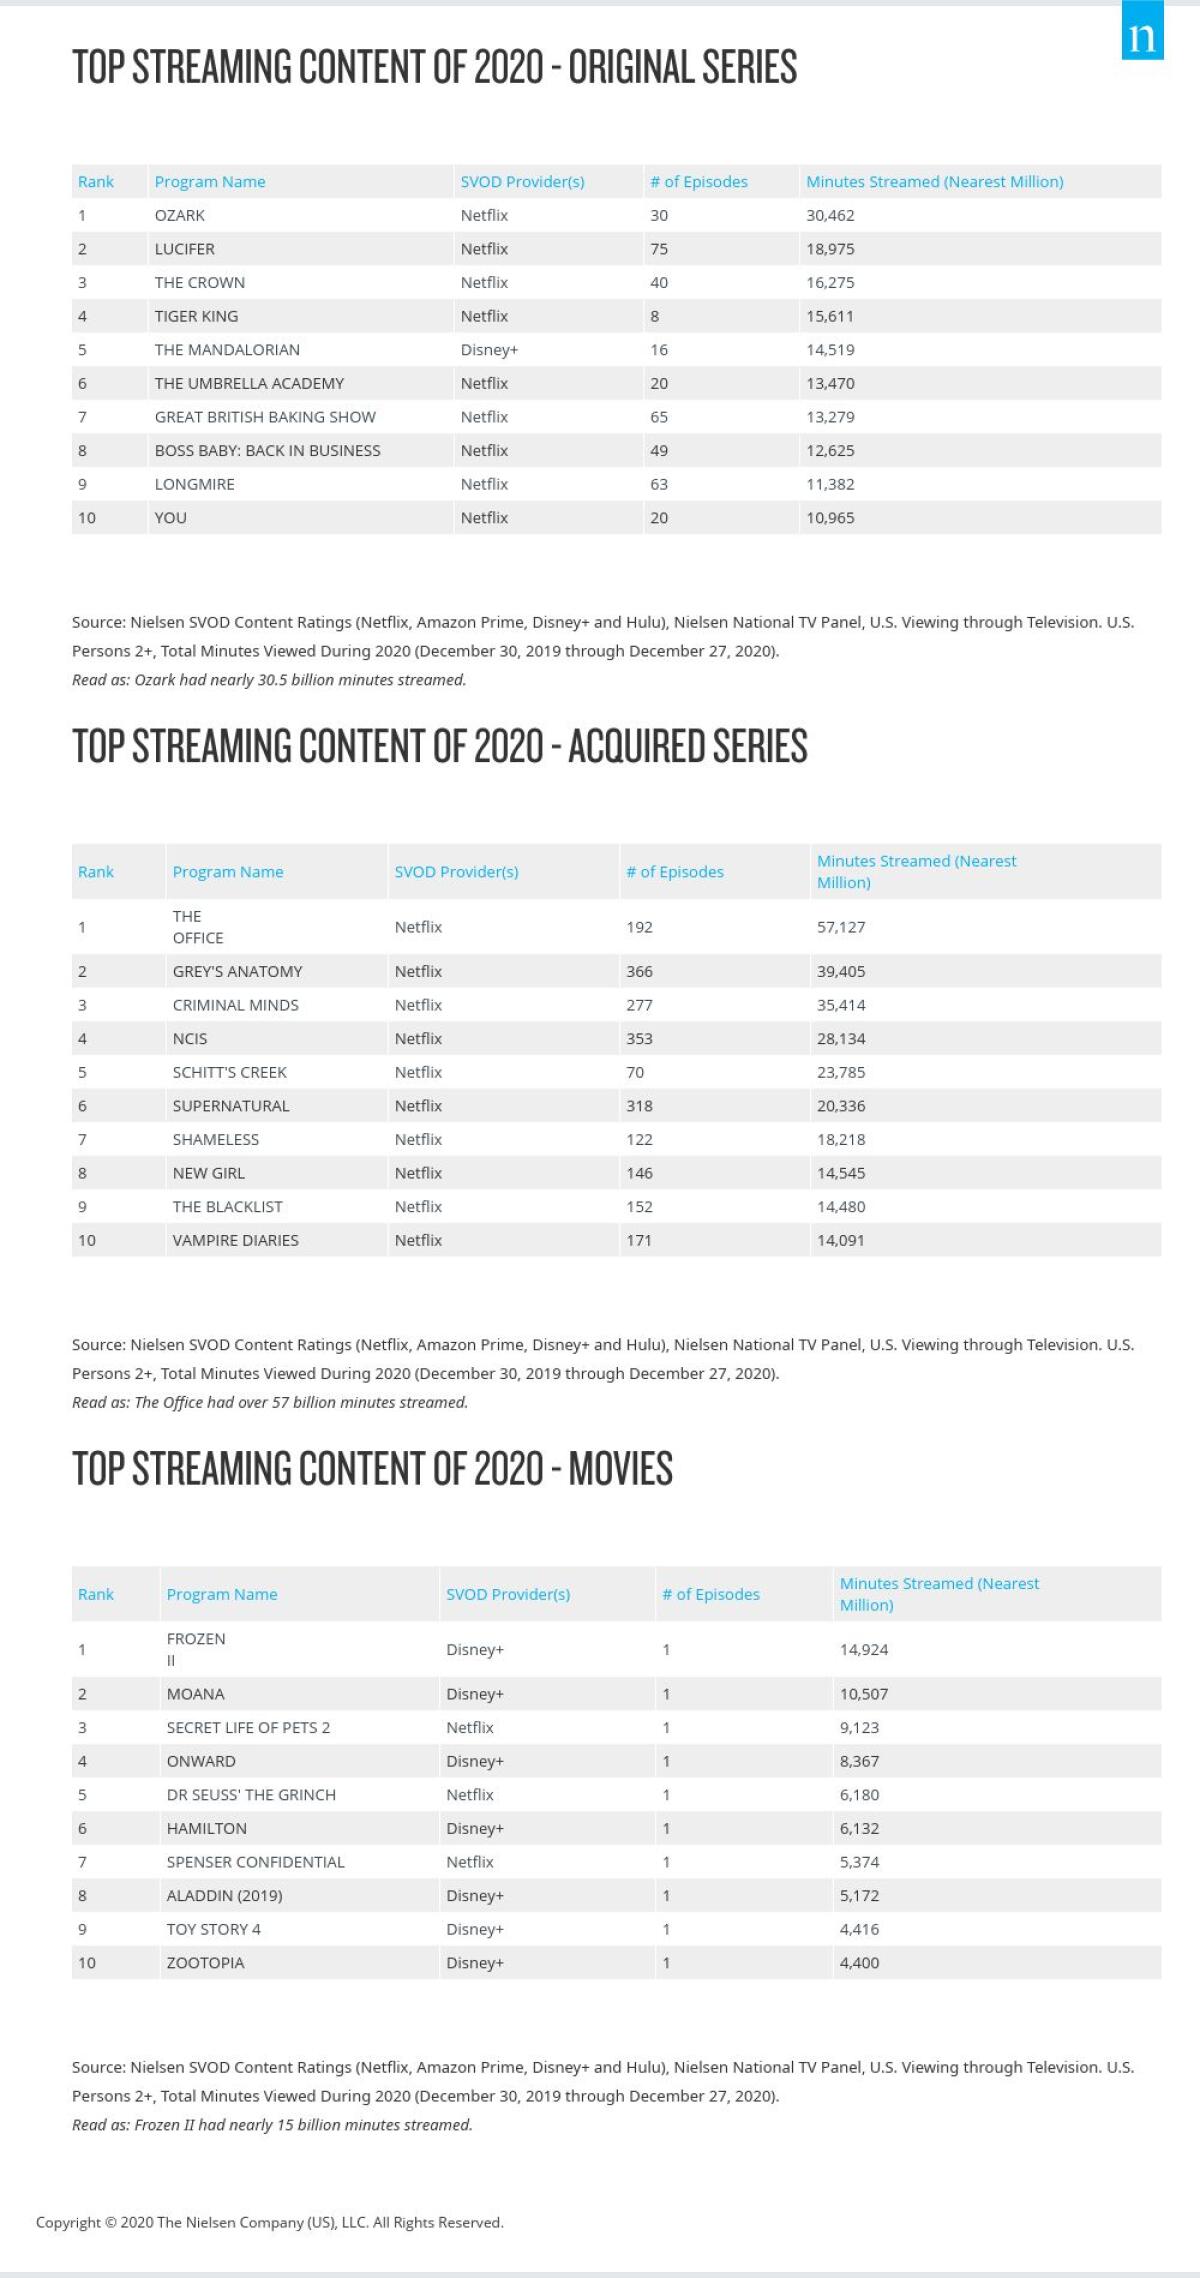 Nielsen released data indicating the top streamed content of 2020 based on watch time.